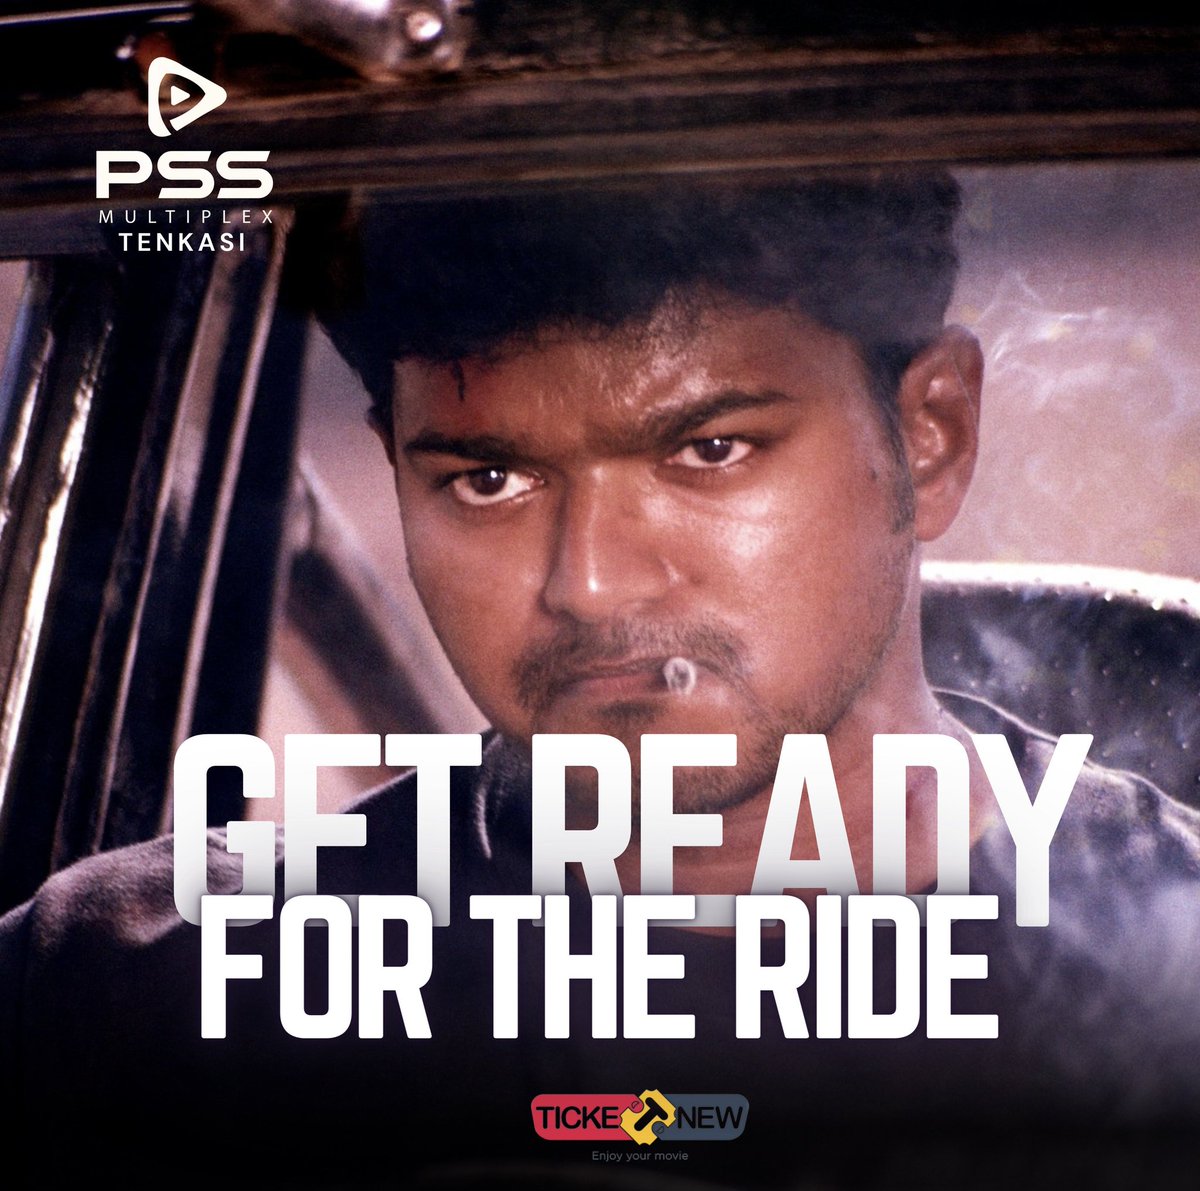 Get Ready for a Massive Opening for a Re-release movie at PssMultiplex Tenkasi 🥵🥵🔥🔥 Thalapathy @actorvijay Fort For a Reason 🙏  Celebration Start From Tomorrow 🤙 #GhilliReRelease #Ghilli4K @PssMultiplexOff